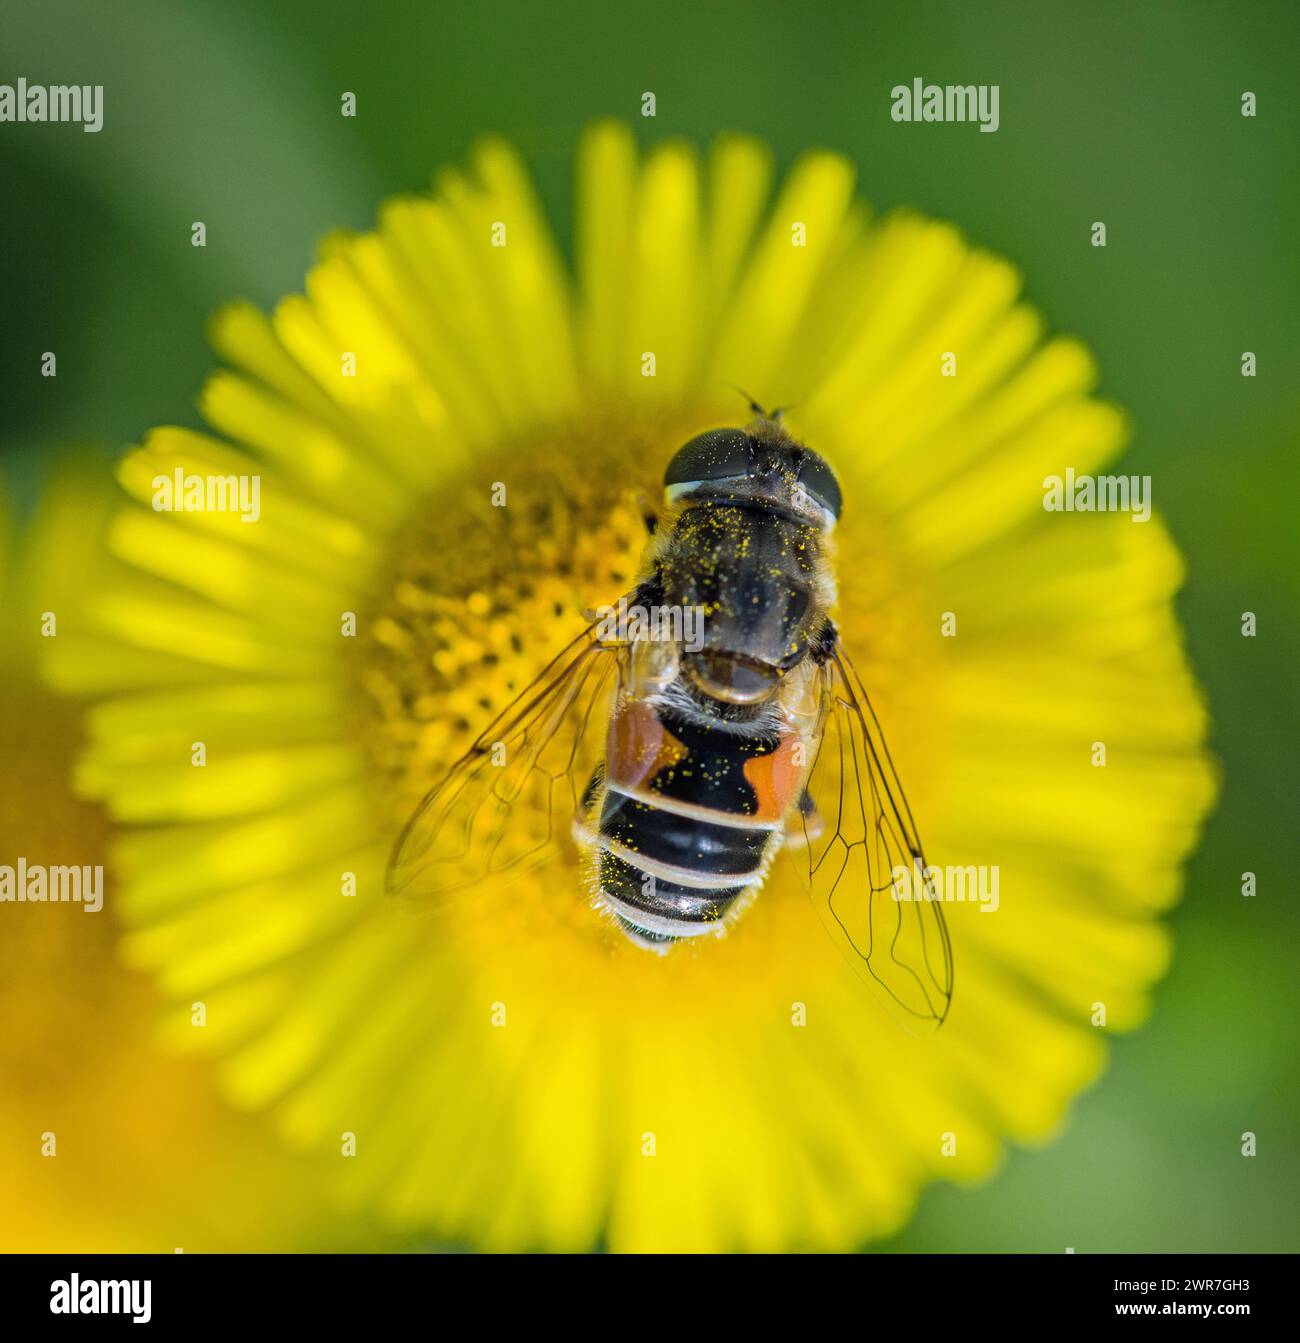 A hoverfly eating into a yellow summer flower against a flower and greenery background Stock Photo